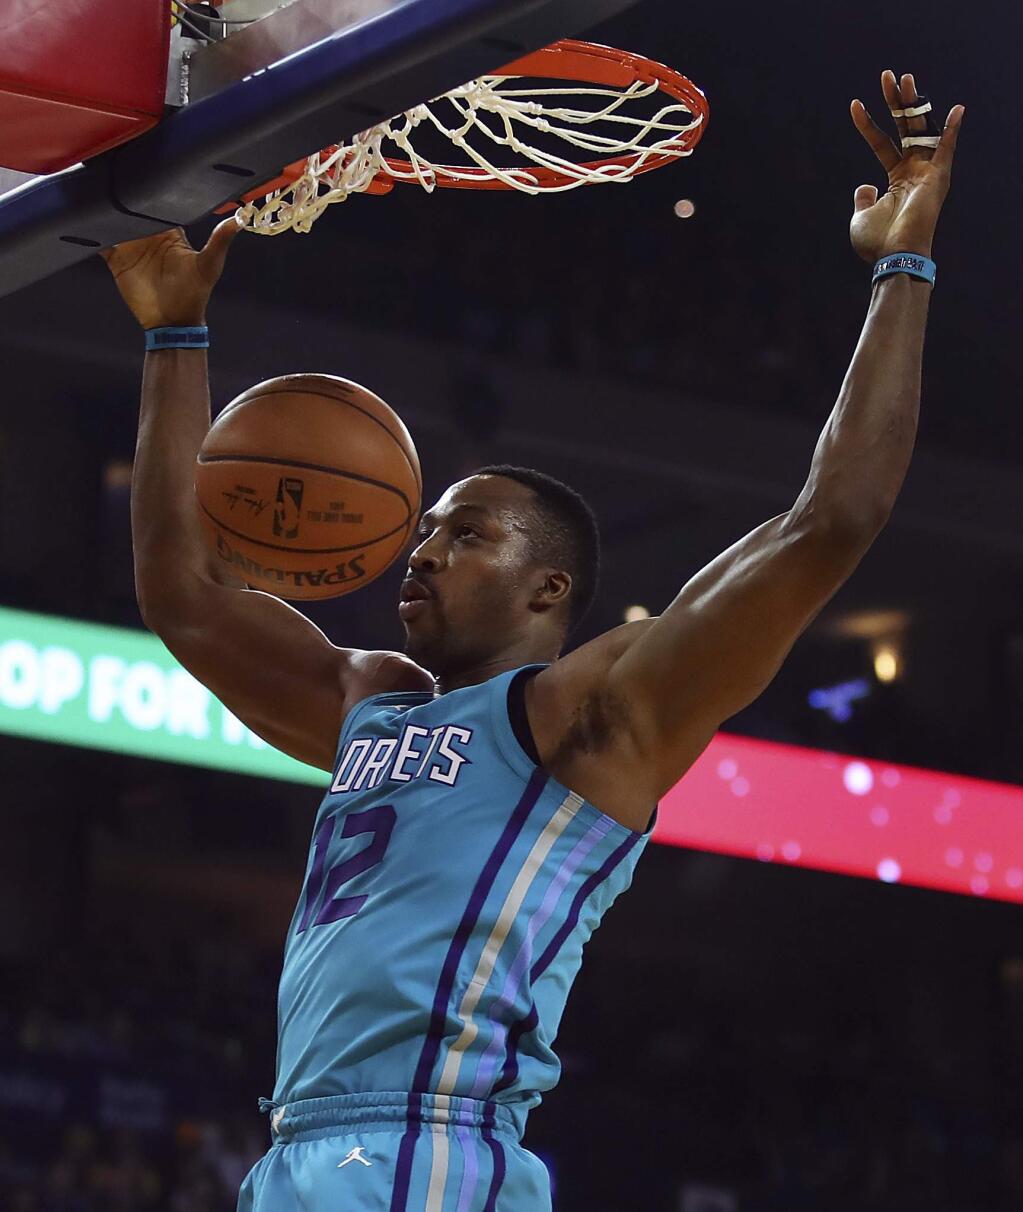 Charlotte Hornets' Dwight Howard scores against the Golden State Warriors during the first half of an NBA basketball game Friday, Dec. 29, 2017, in Oakland, Calif. (AP Photo/Ben Margot)